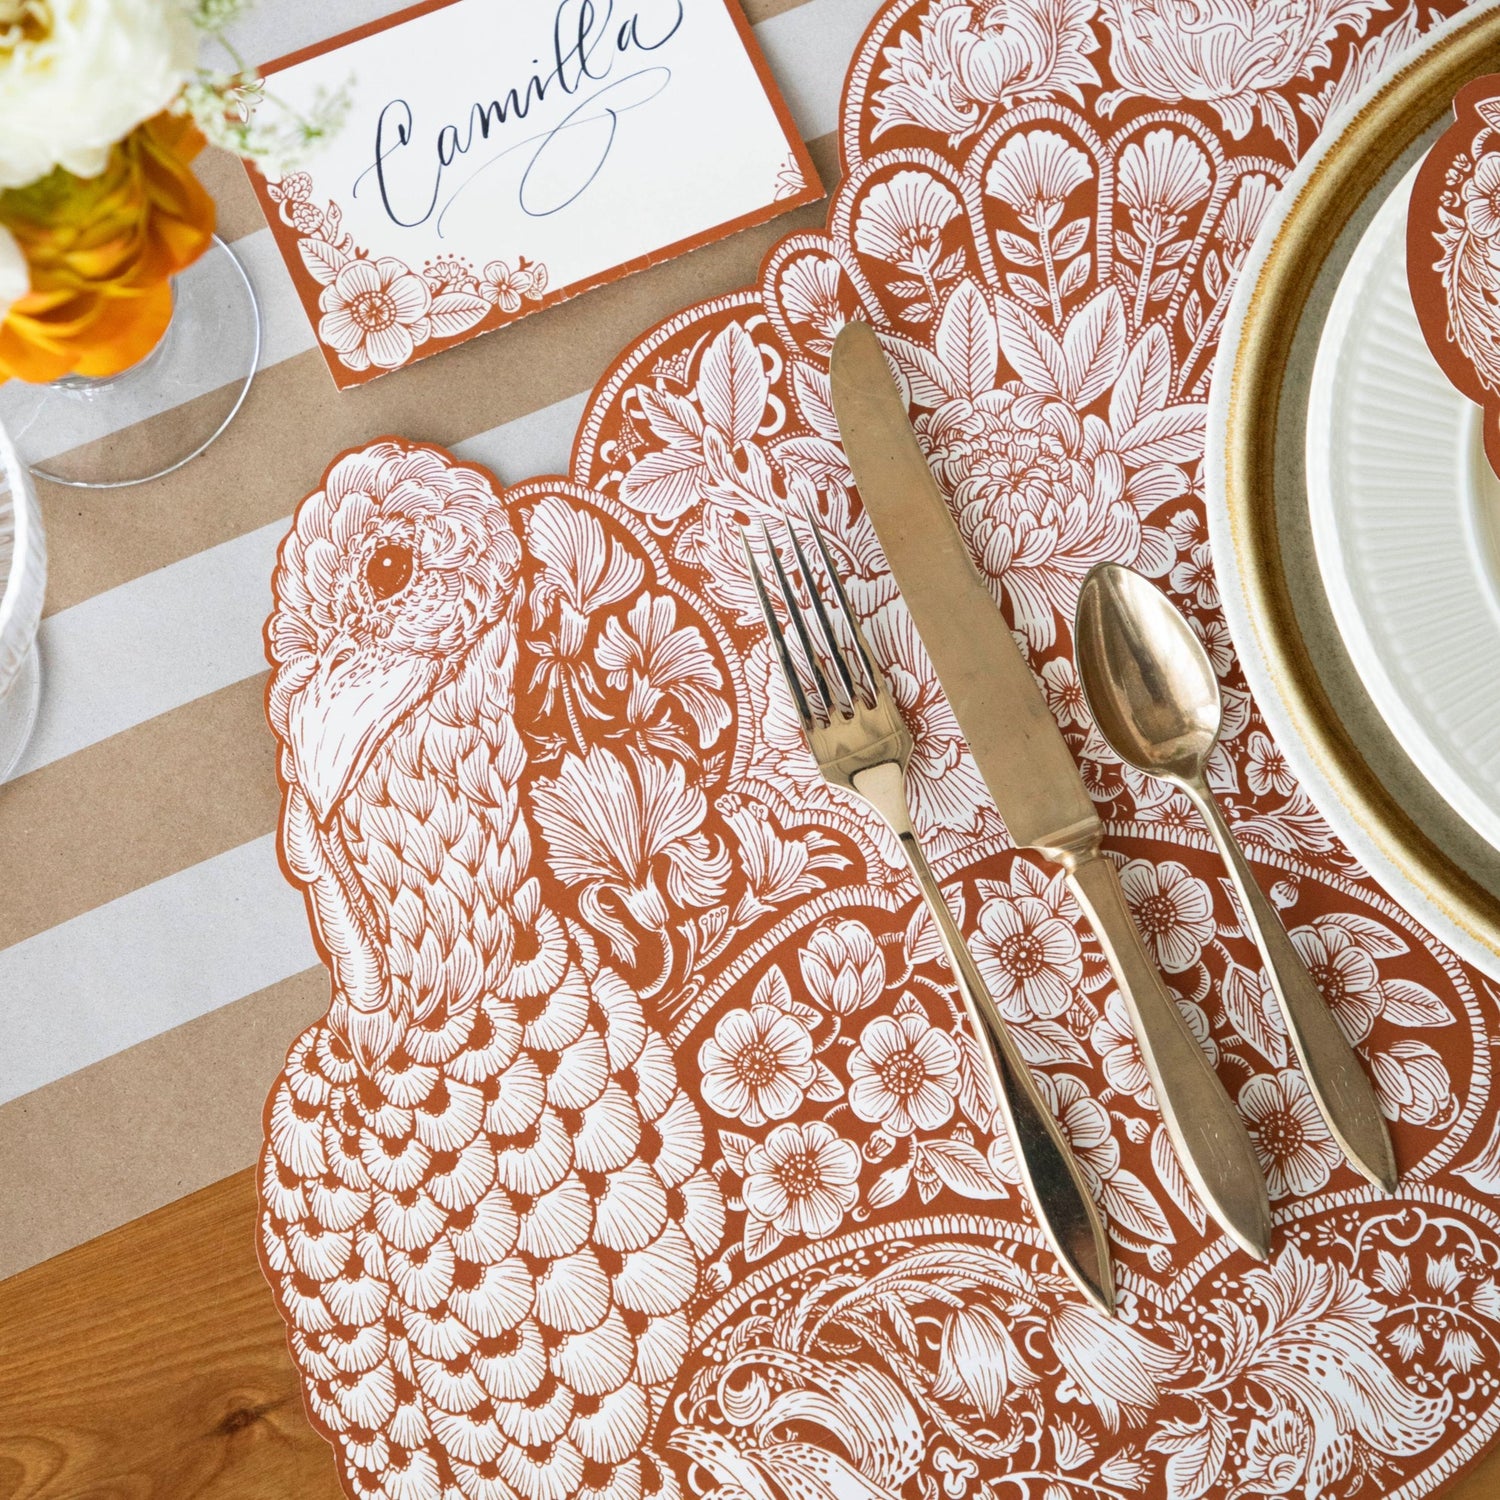 Close-up of the Die-cut Harvest Turkey Placemat under an elegant Thanksgiving place setting, showing the detailed artwork.